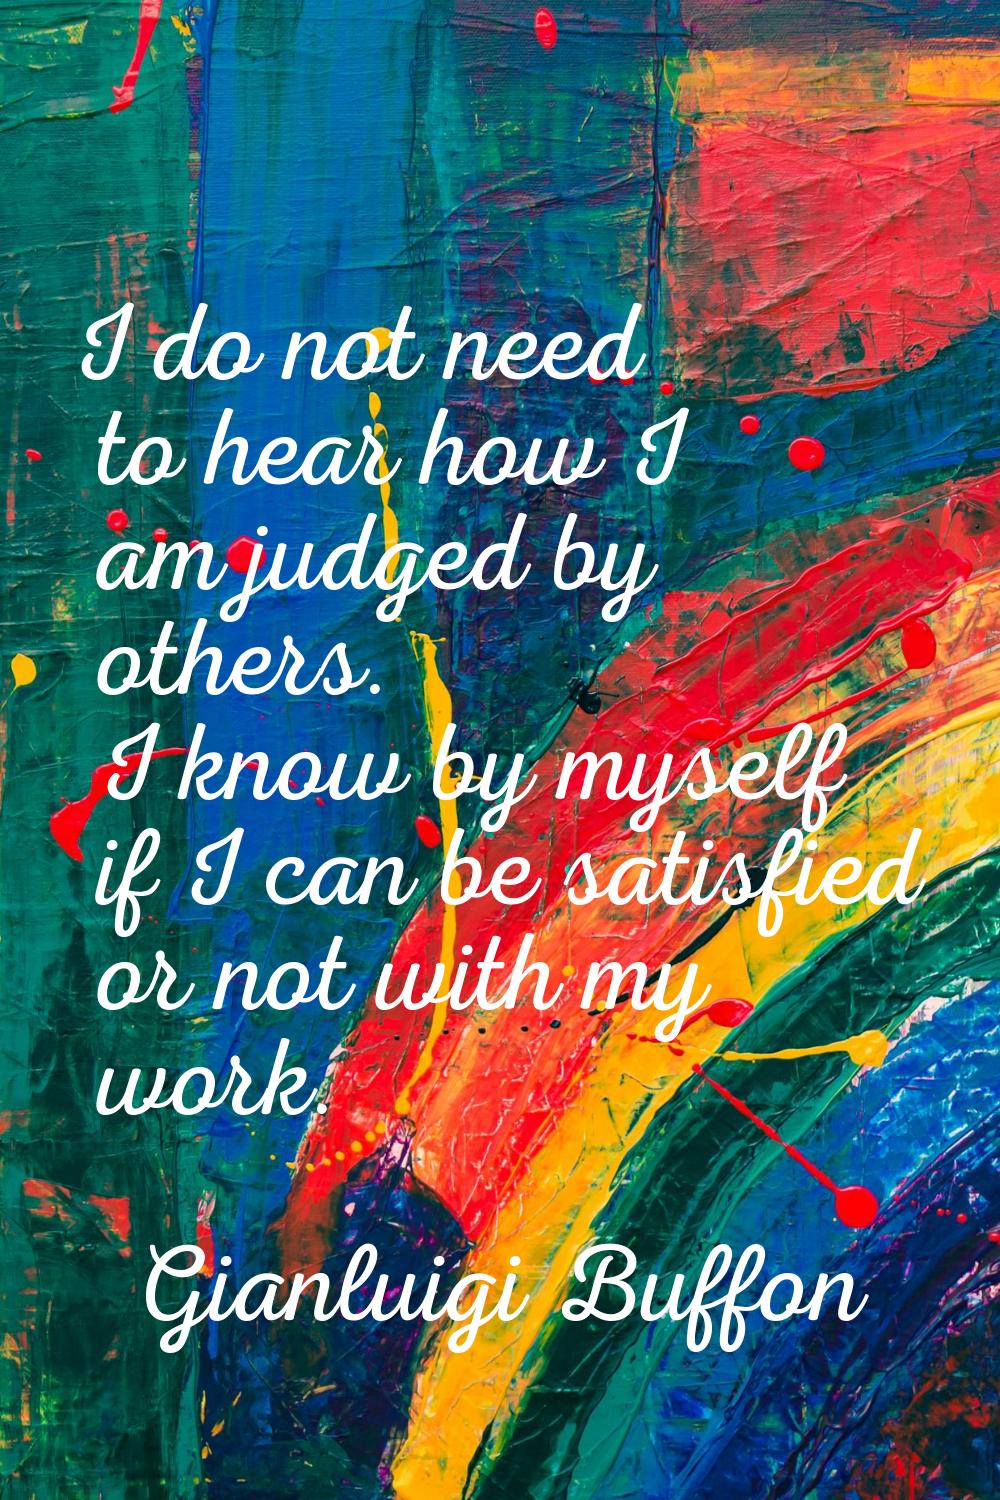 I do not need to hear how I am judged by others. I know by myself if I can be satisfied or not with